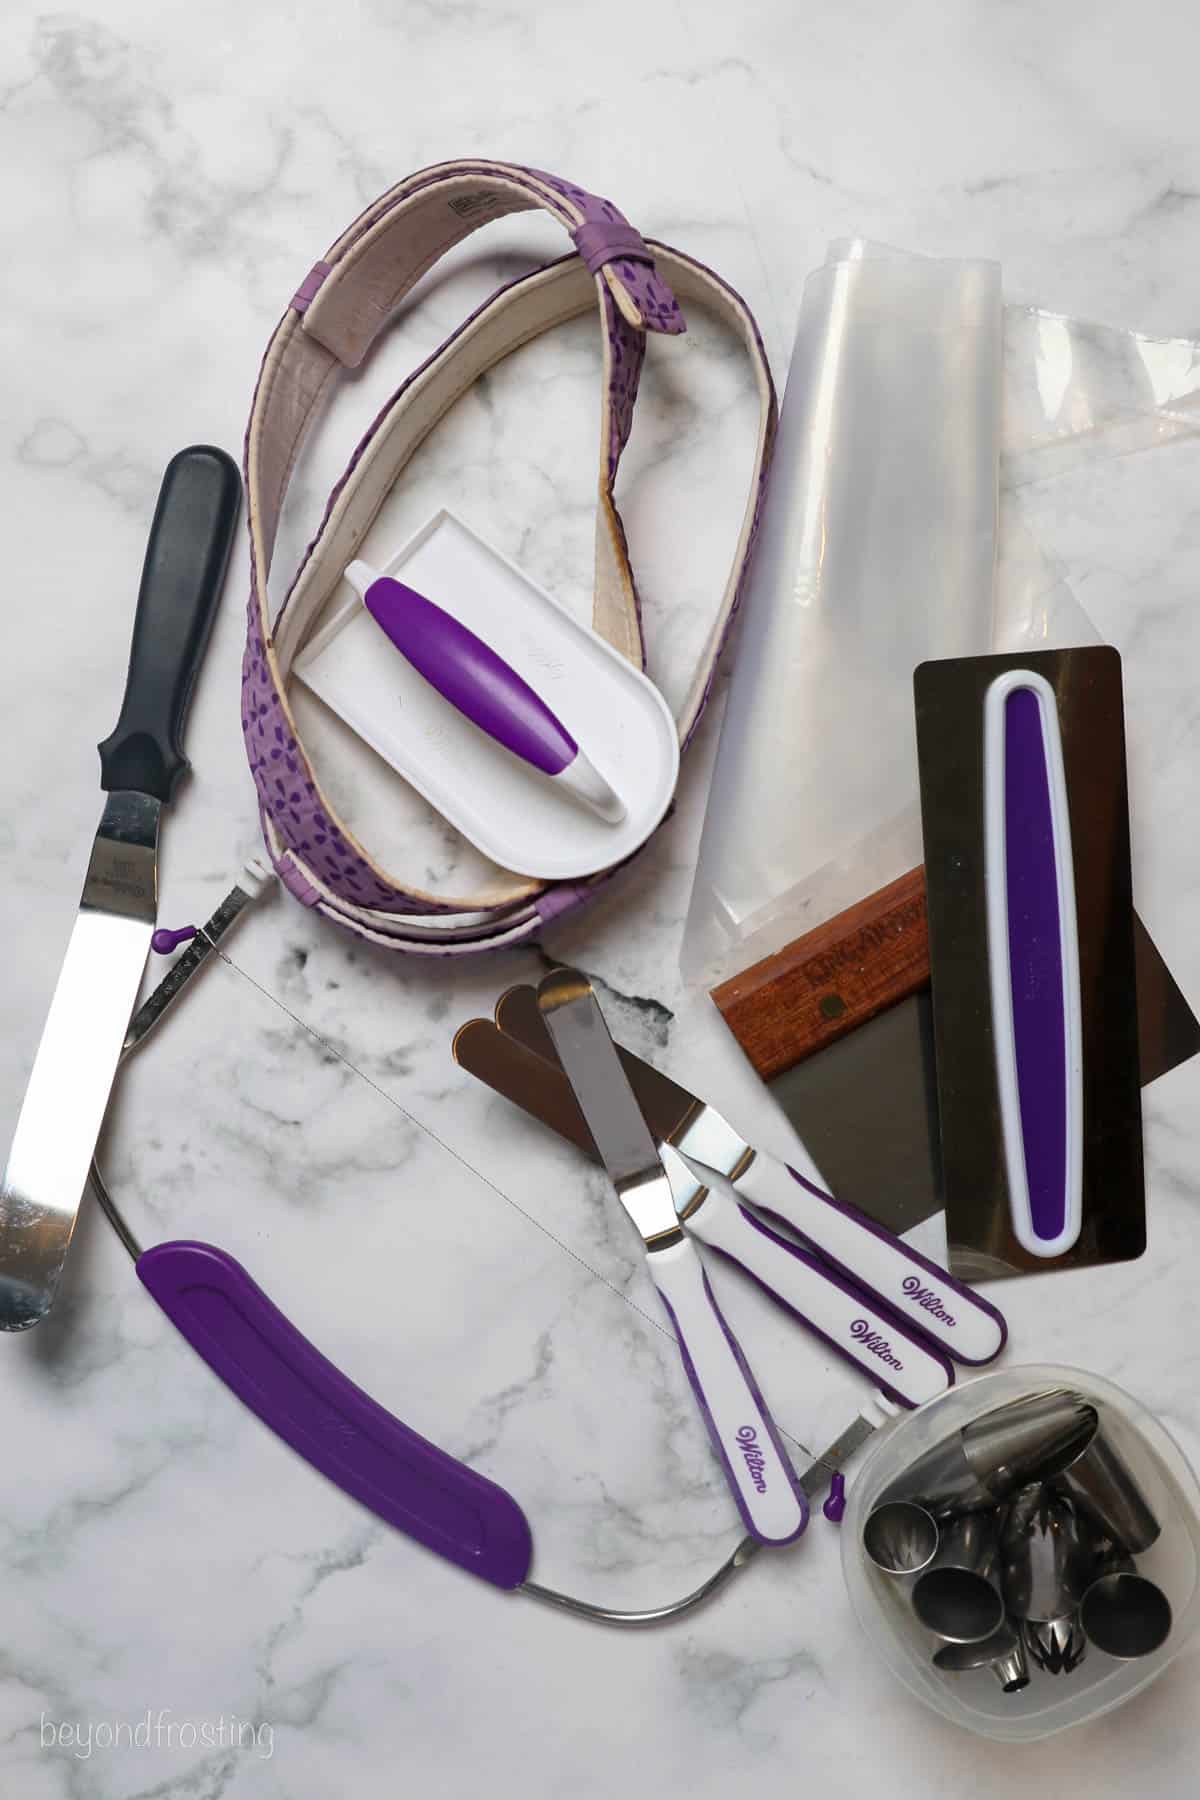 Tools needed to make cakes like icing smoother, bake even stripes and angled spatulas